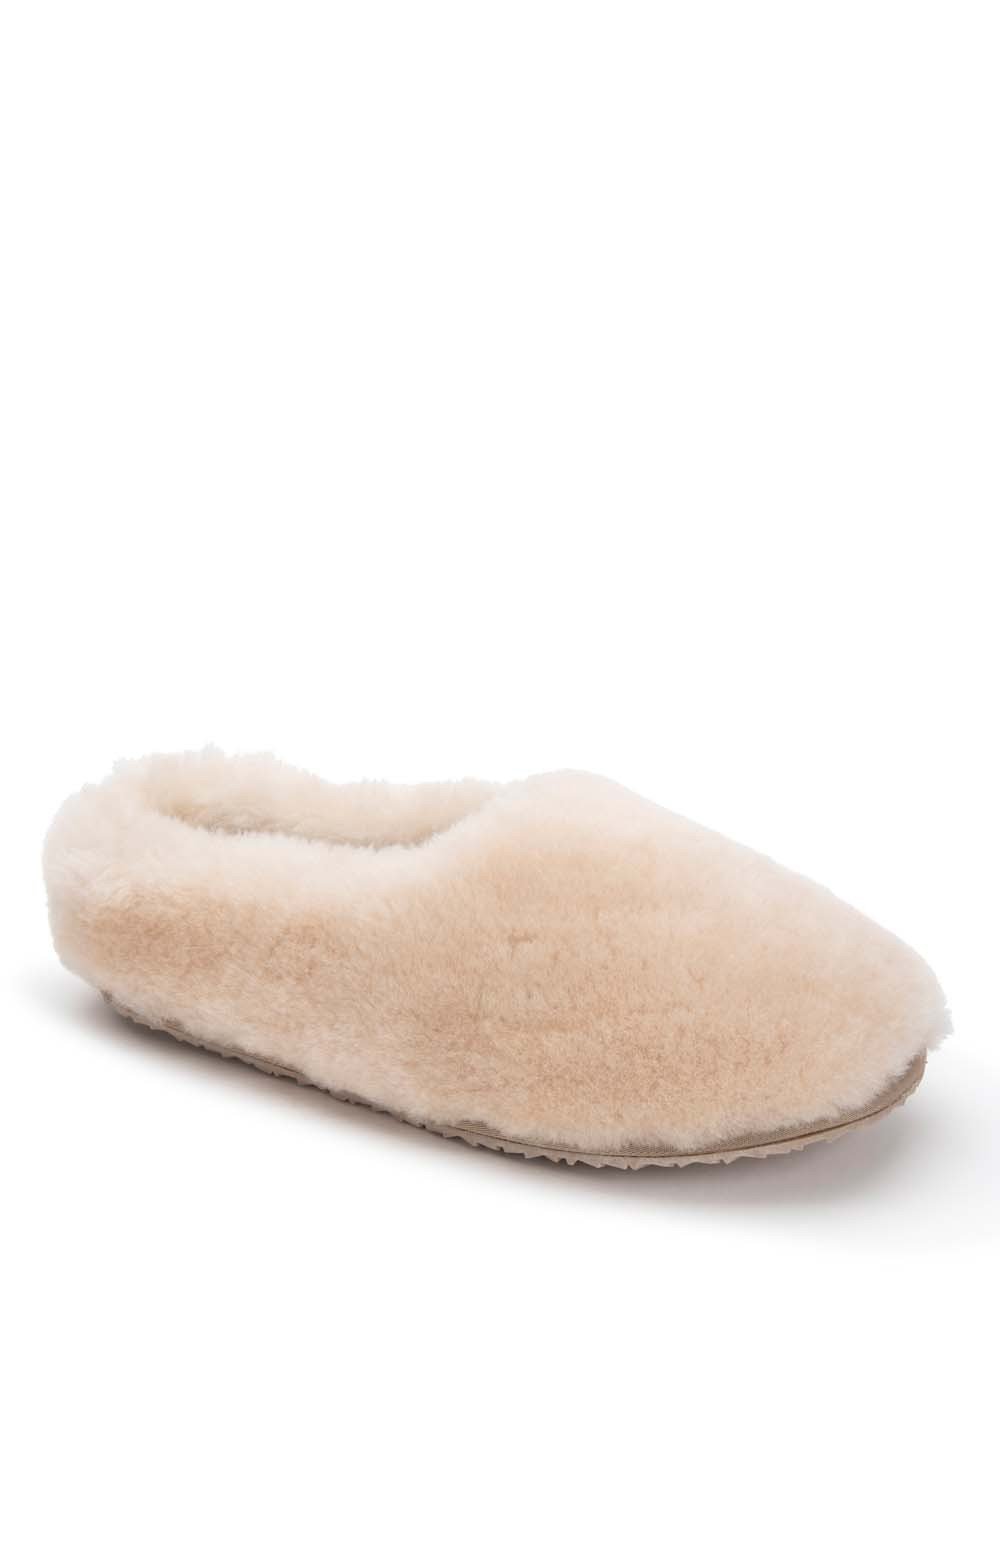 lambswool slippers womens